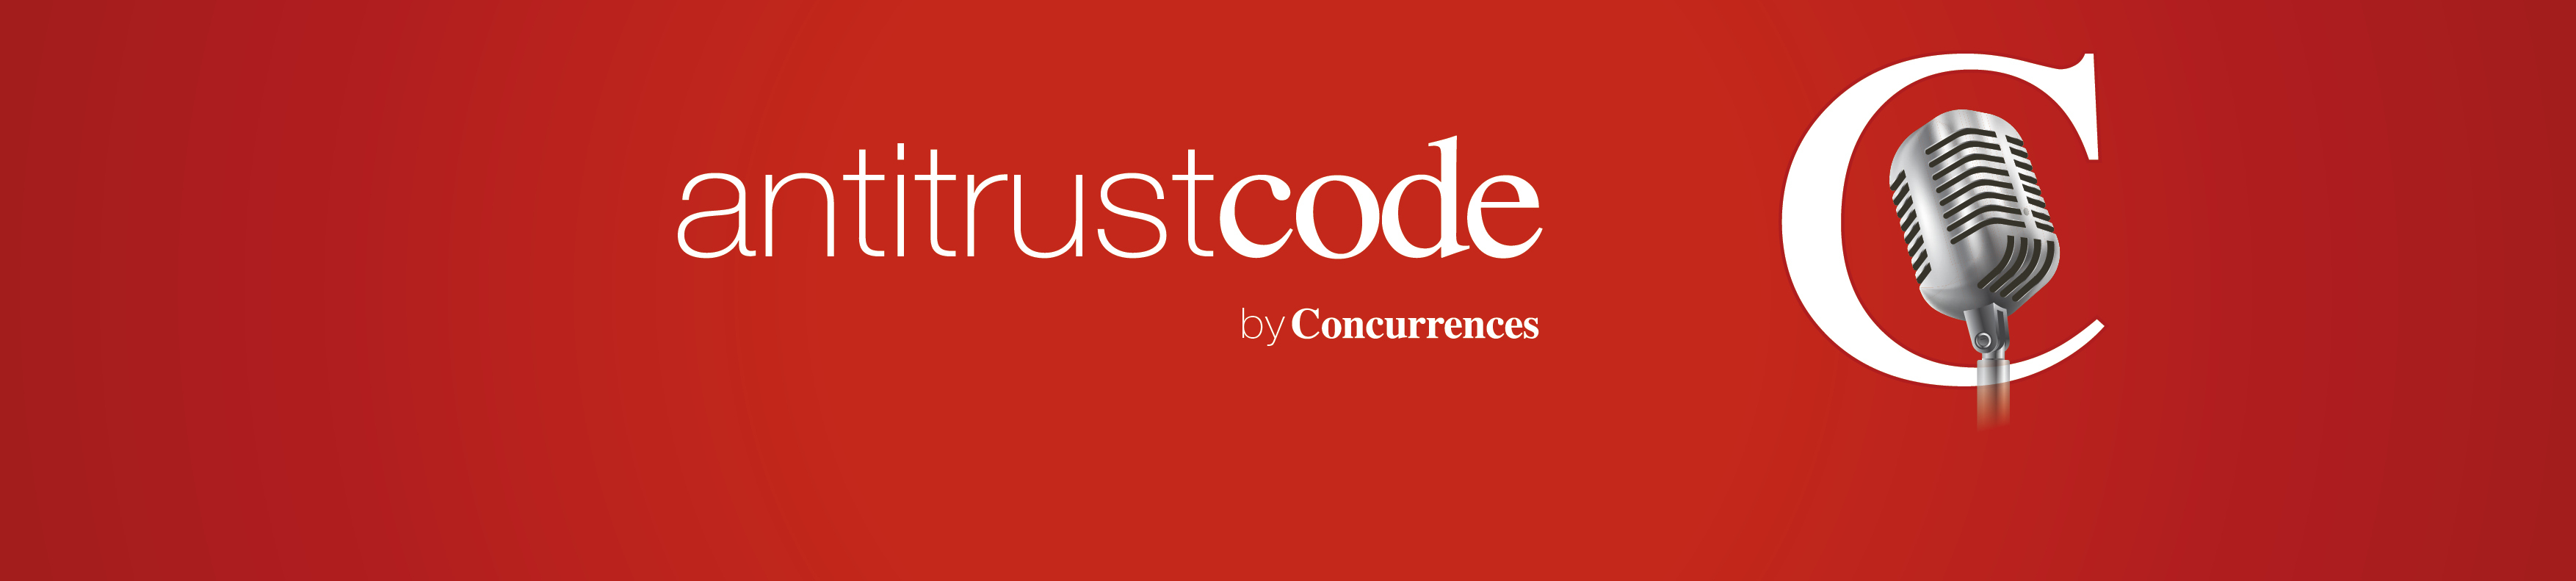 Antitrust Code by Concurrences